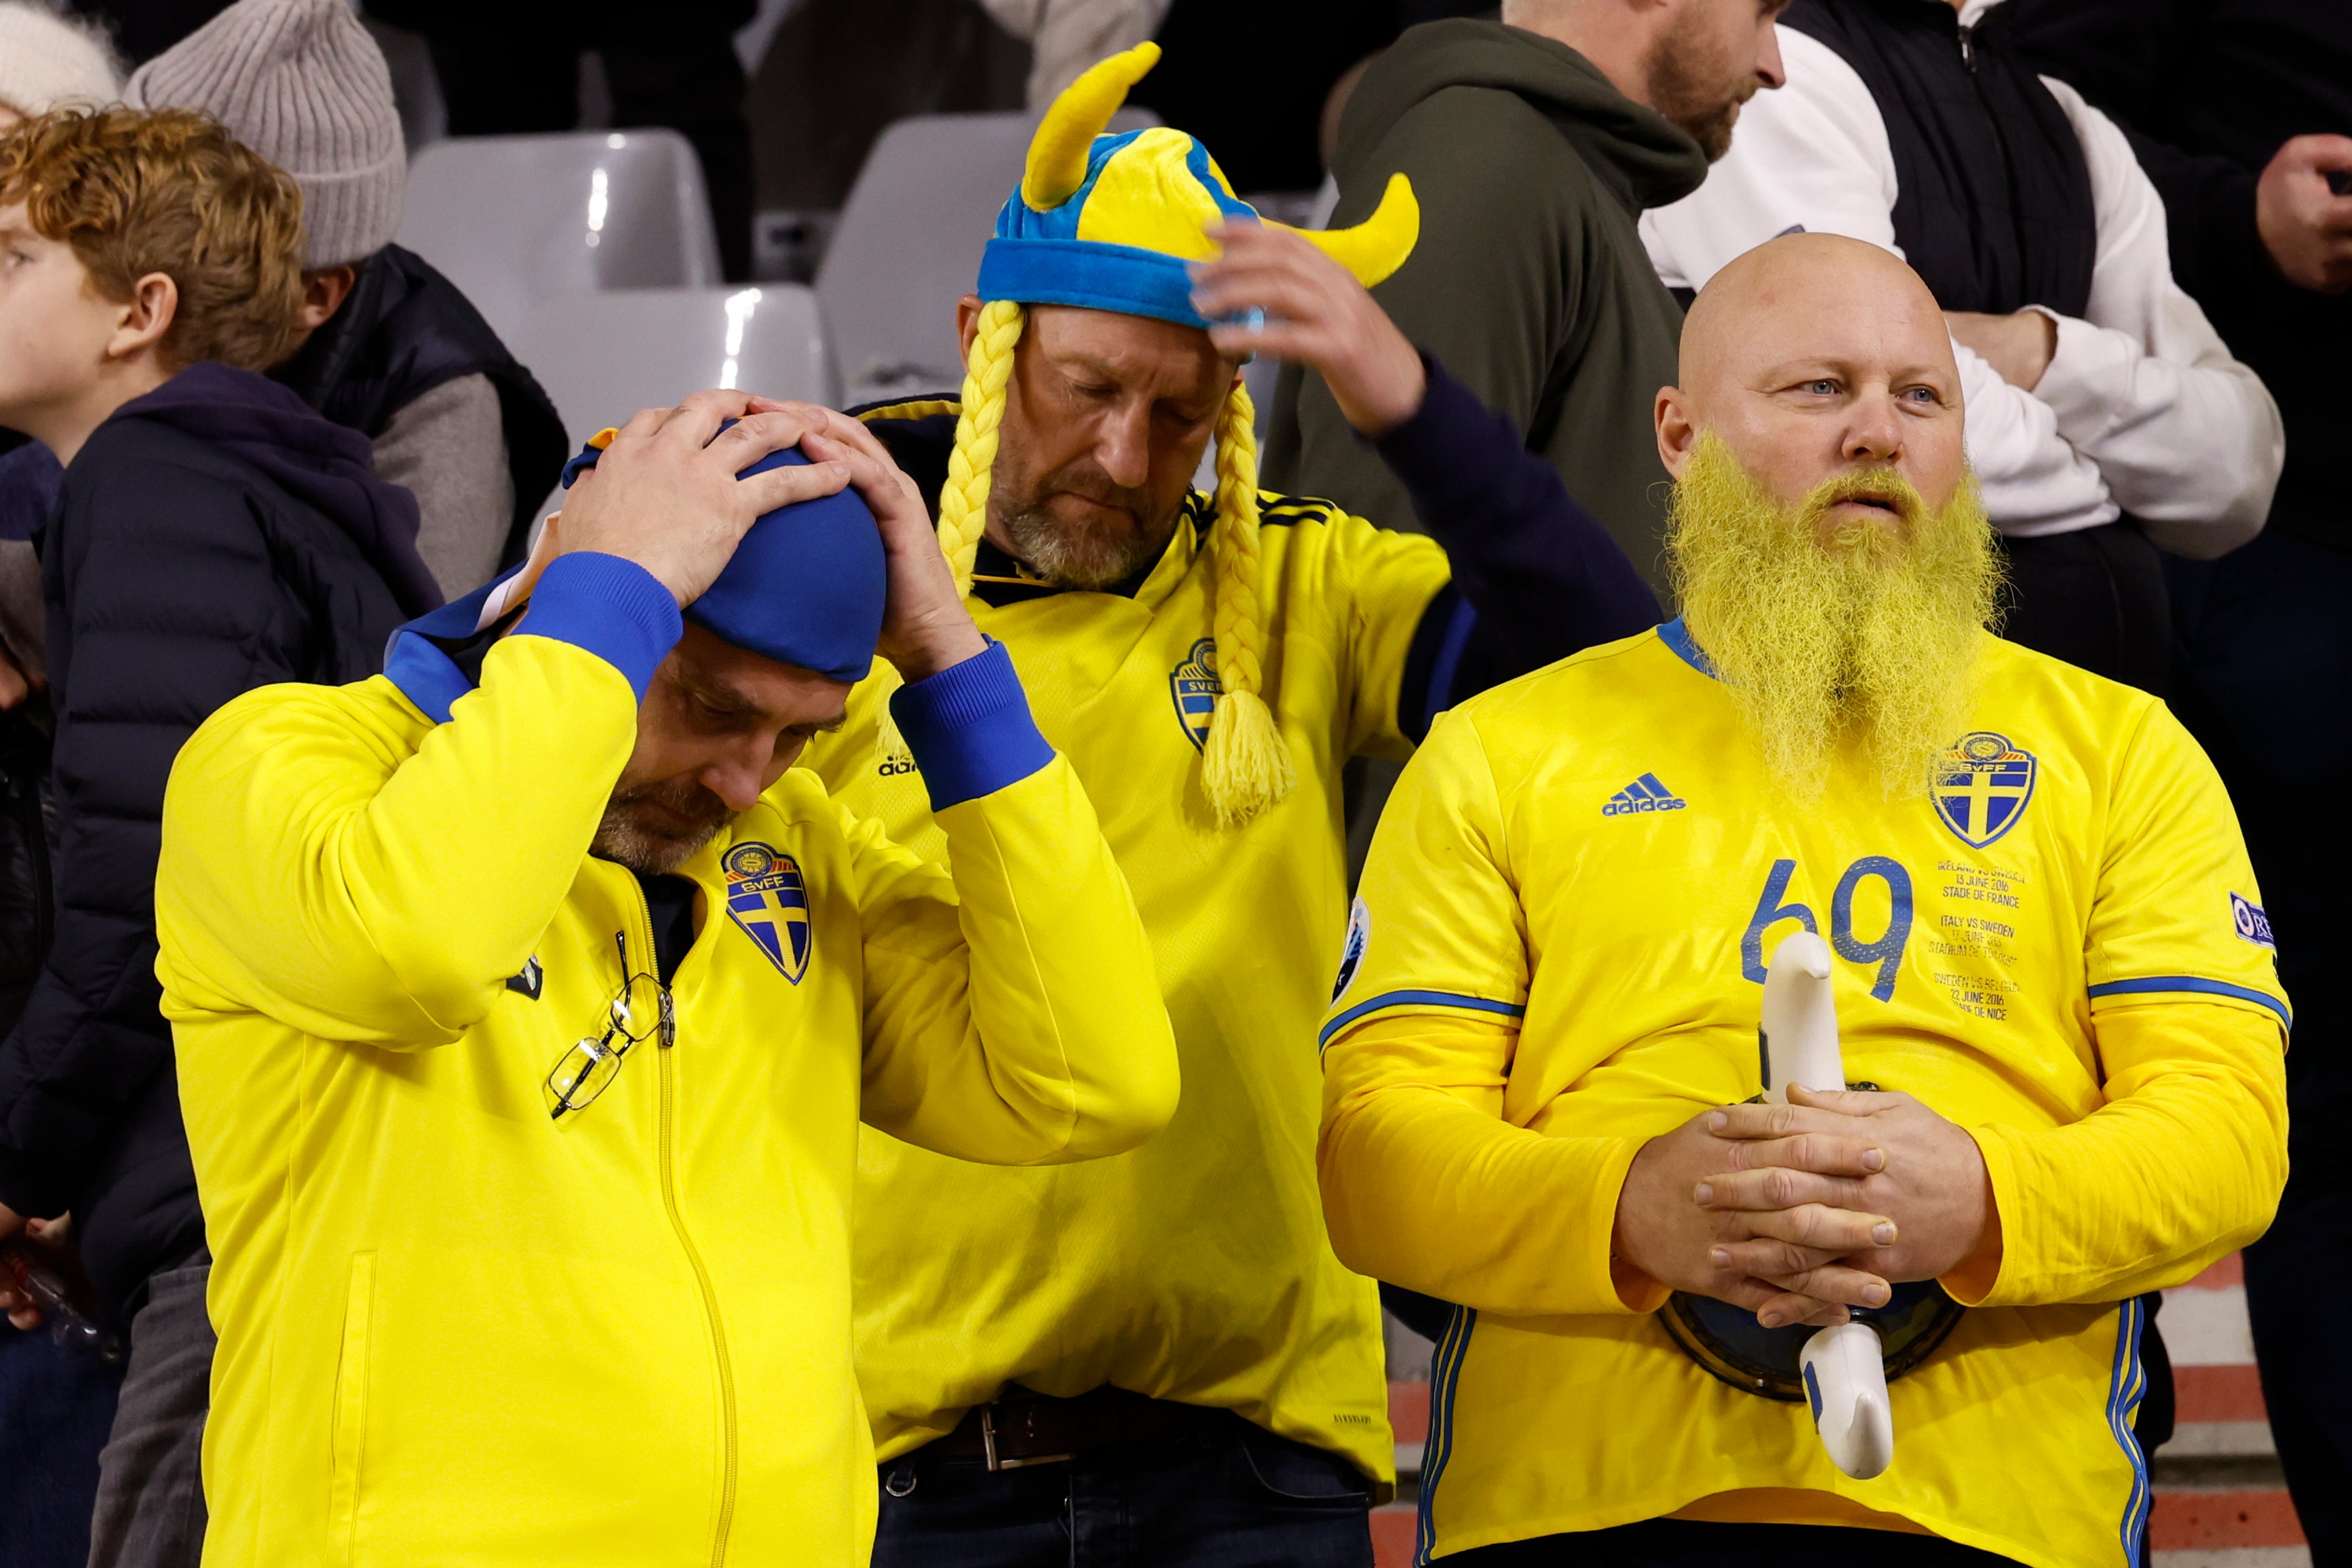 The attack occurred just three miles from Sweden’s football match against Belgium